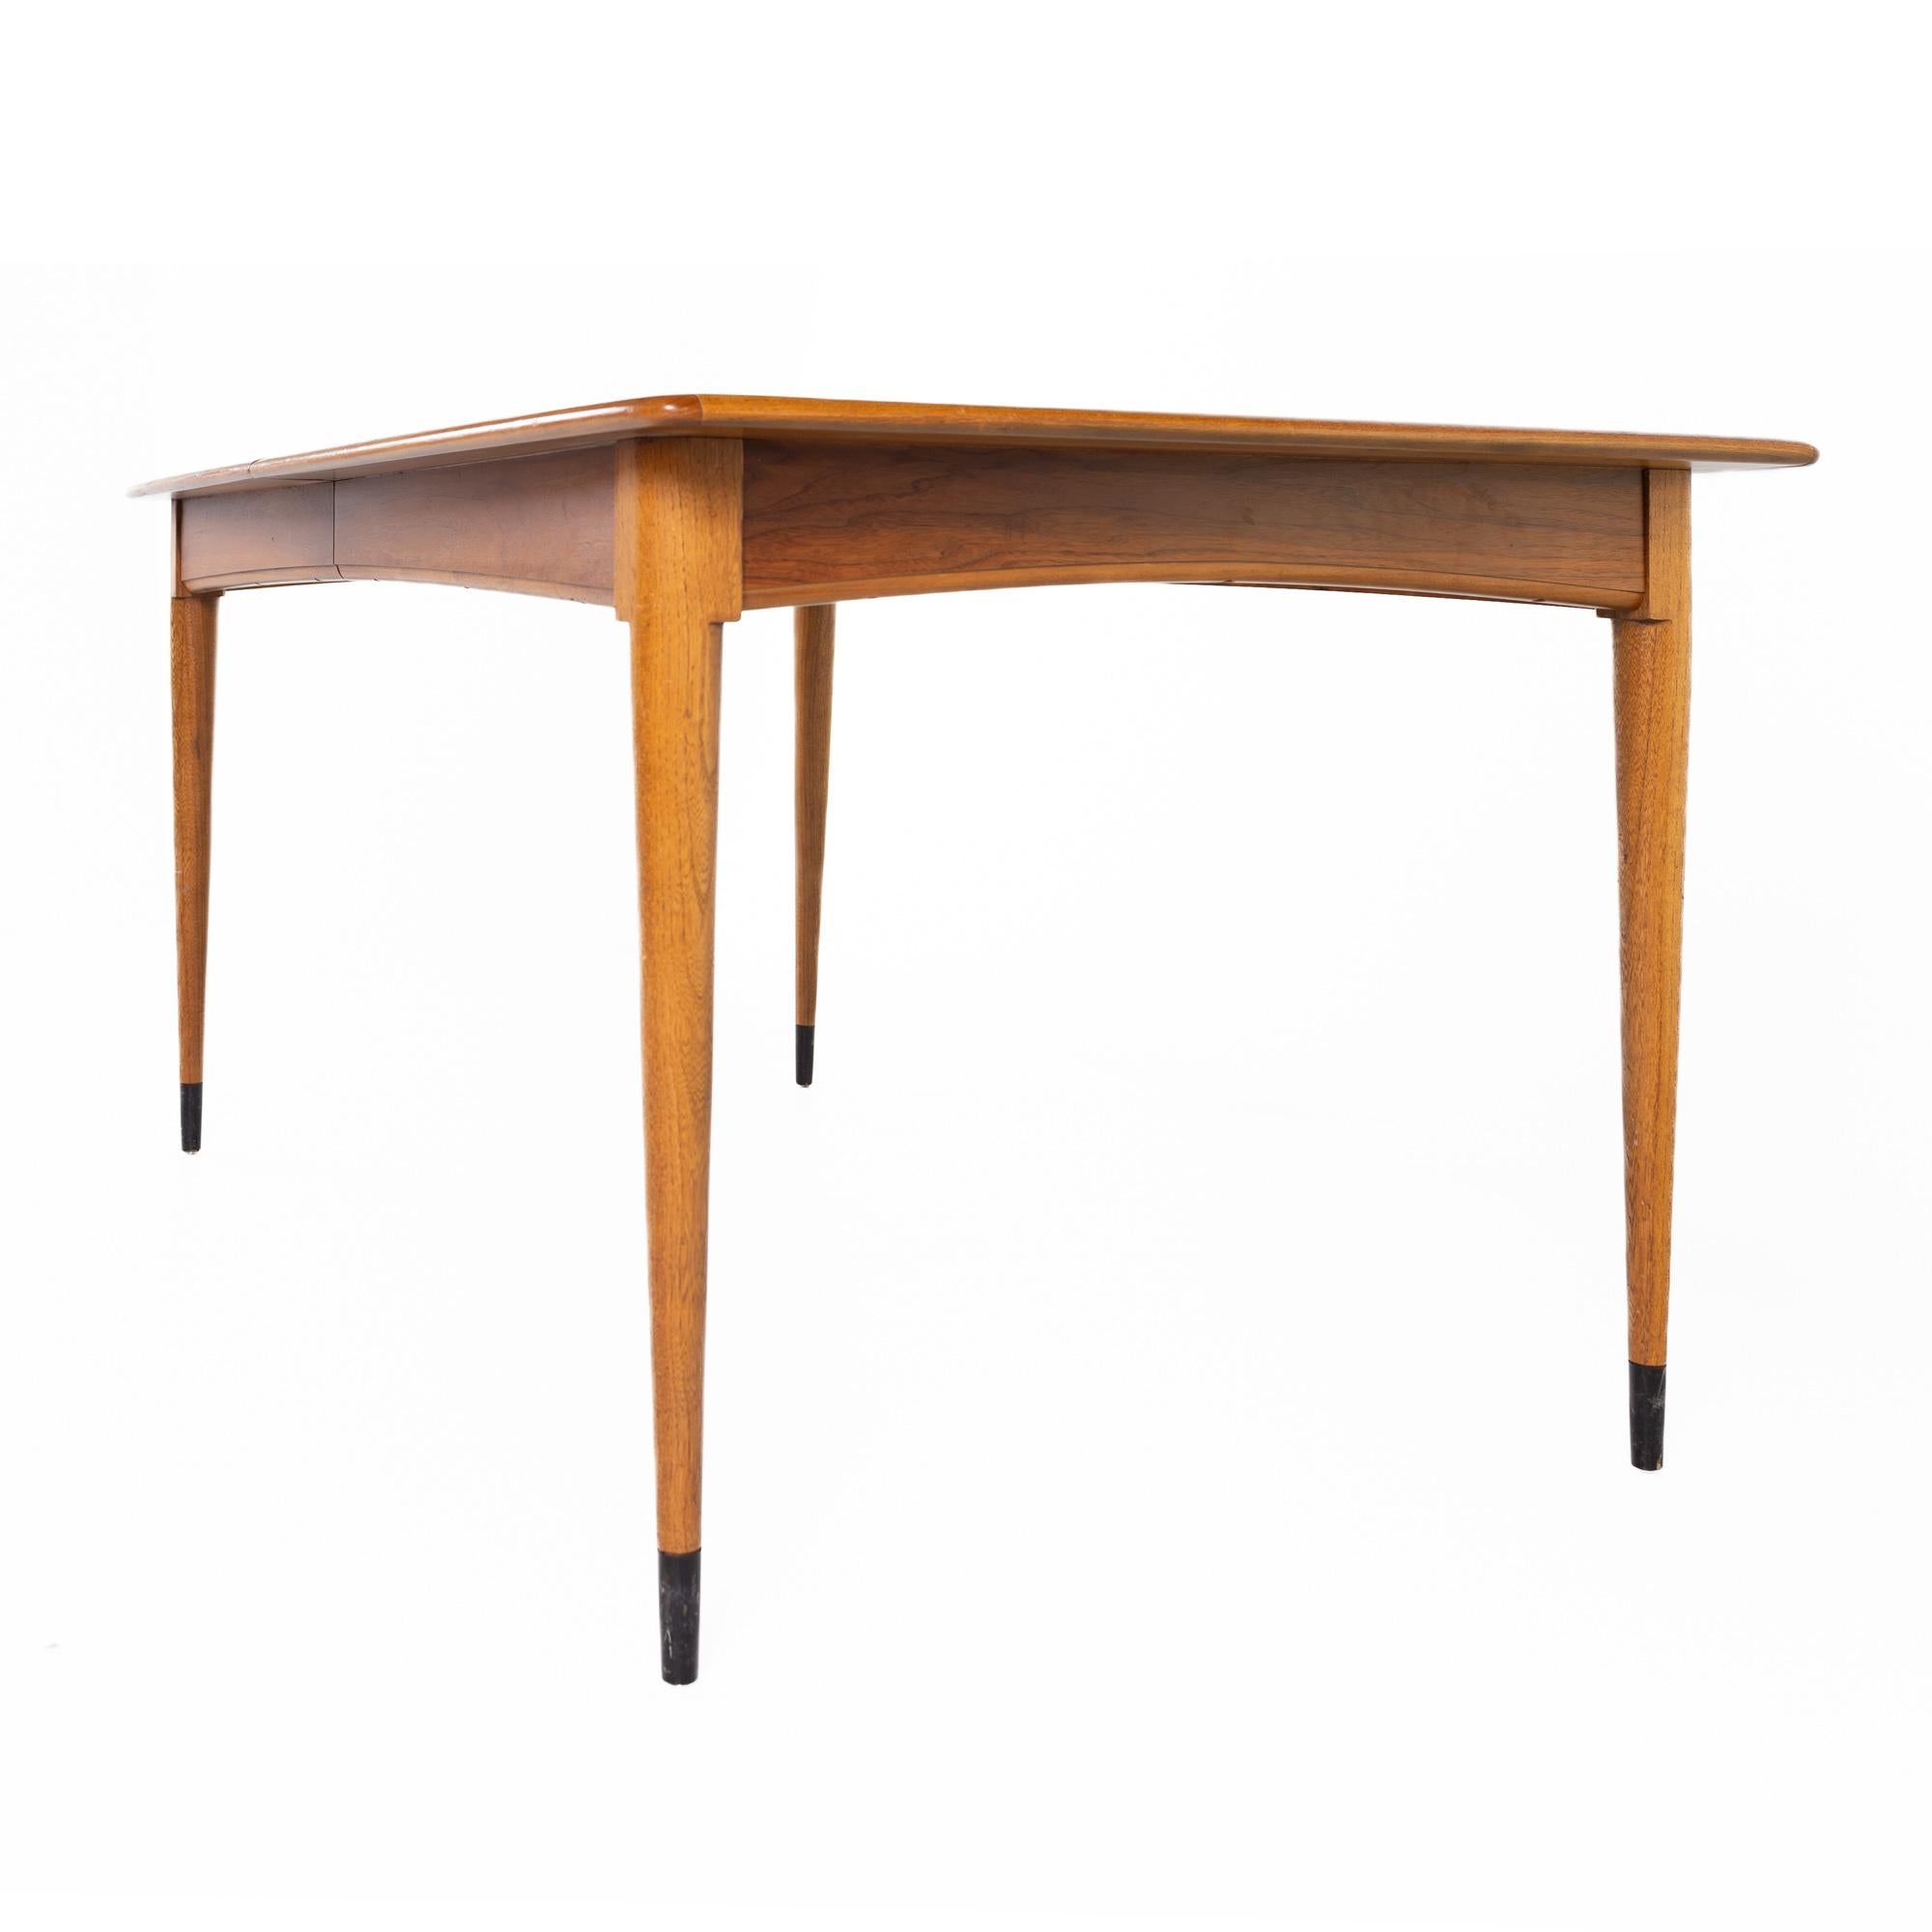 Late 20th Century Lane Acclaim Mid Century Dovetail Dining Table